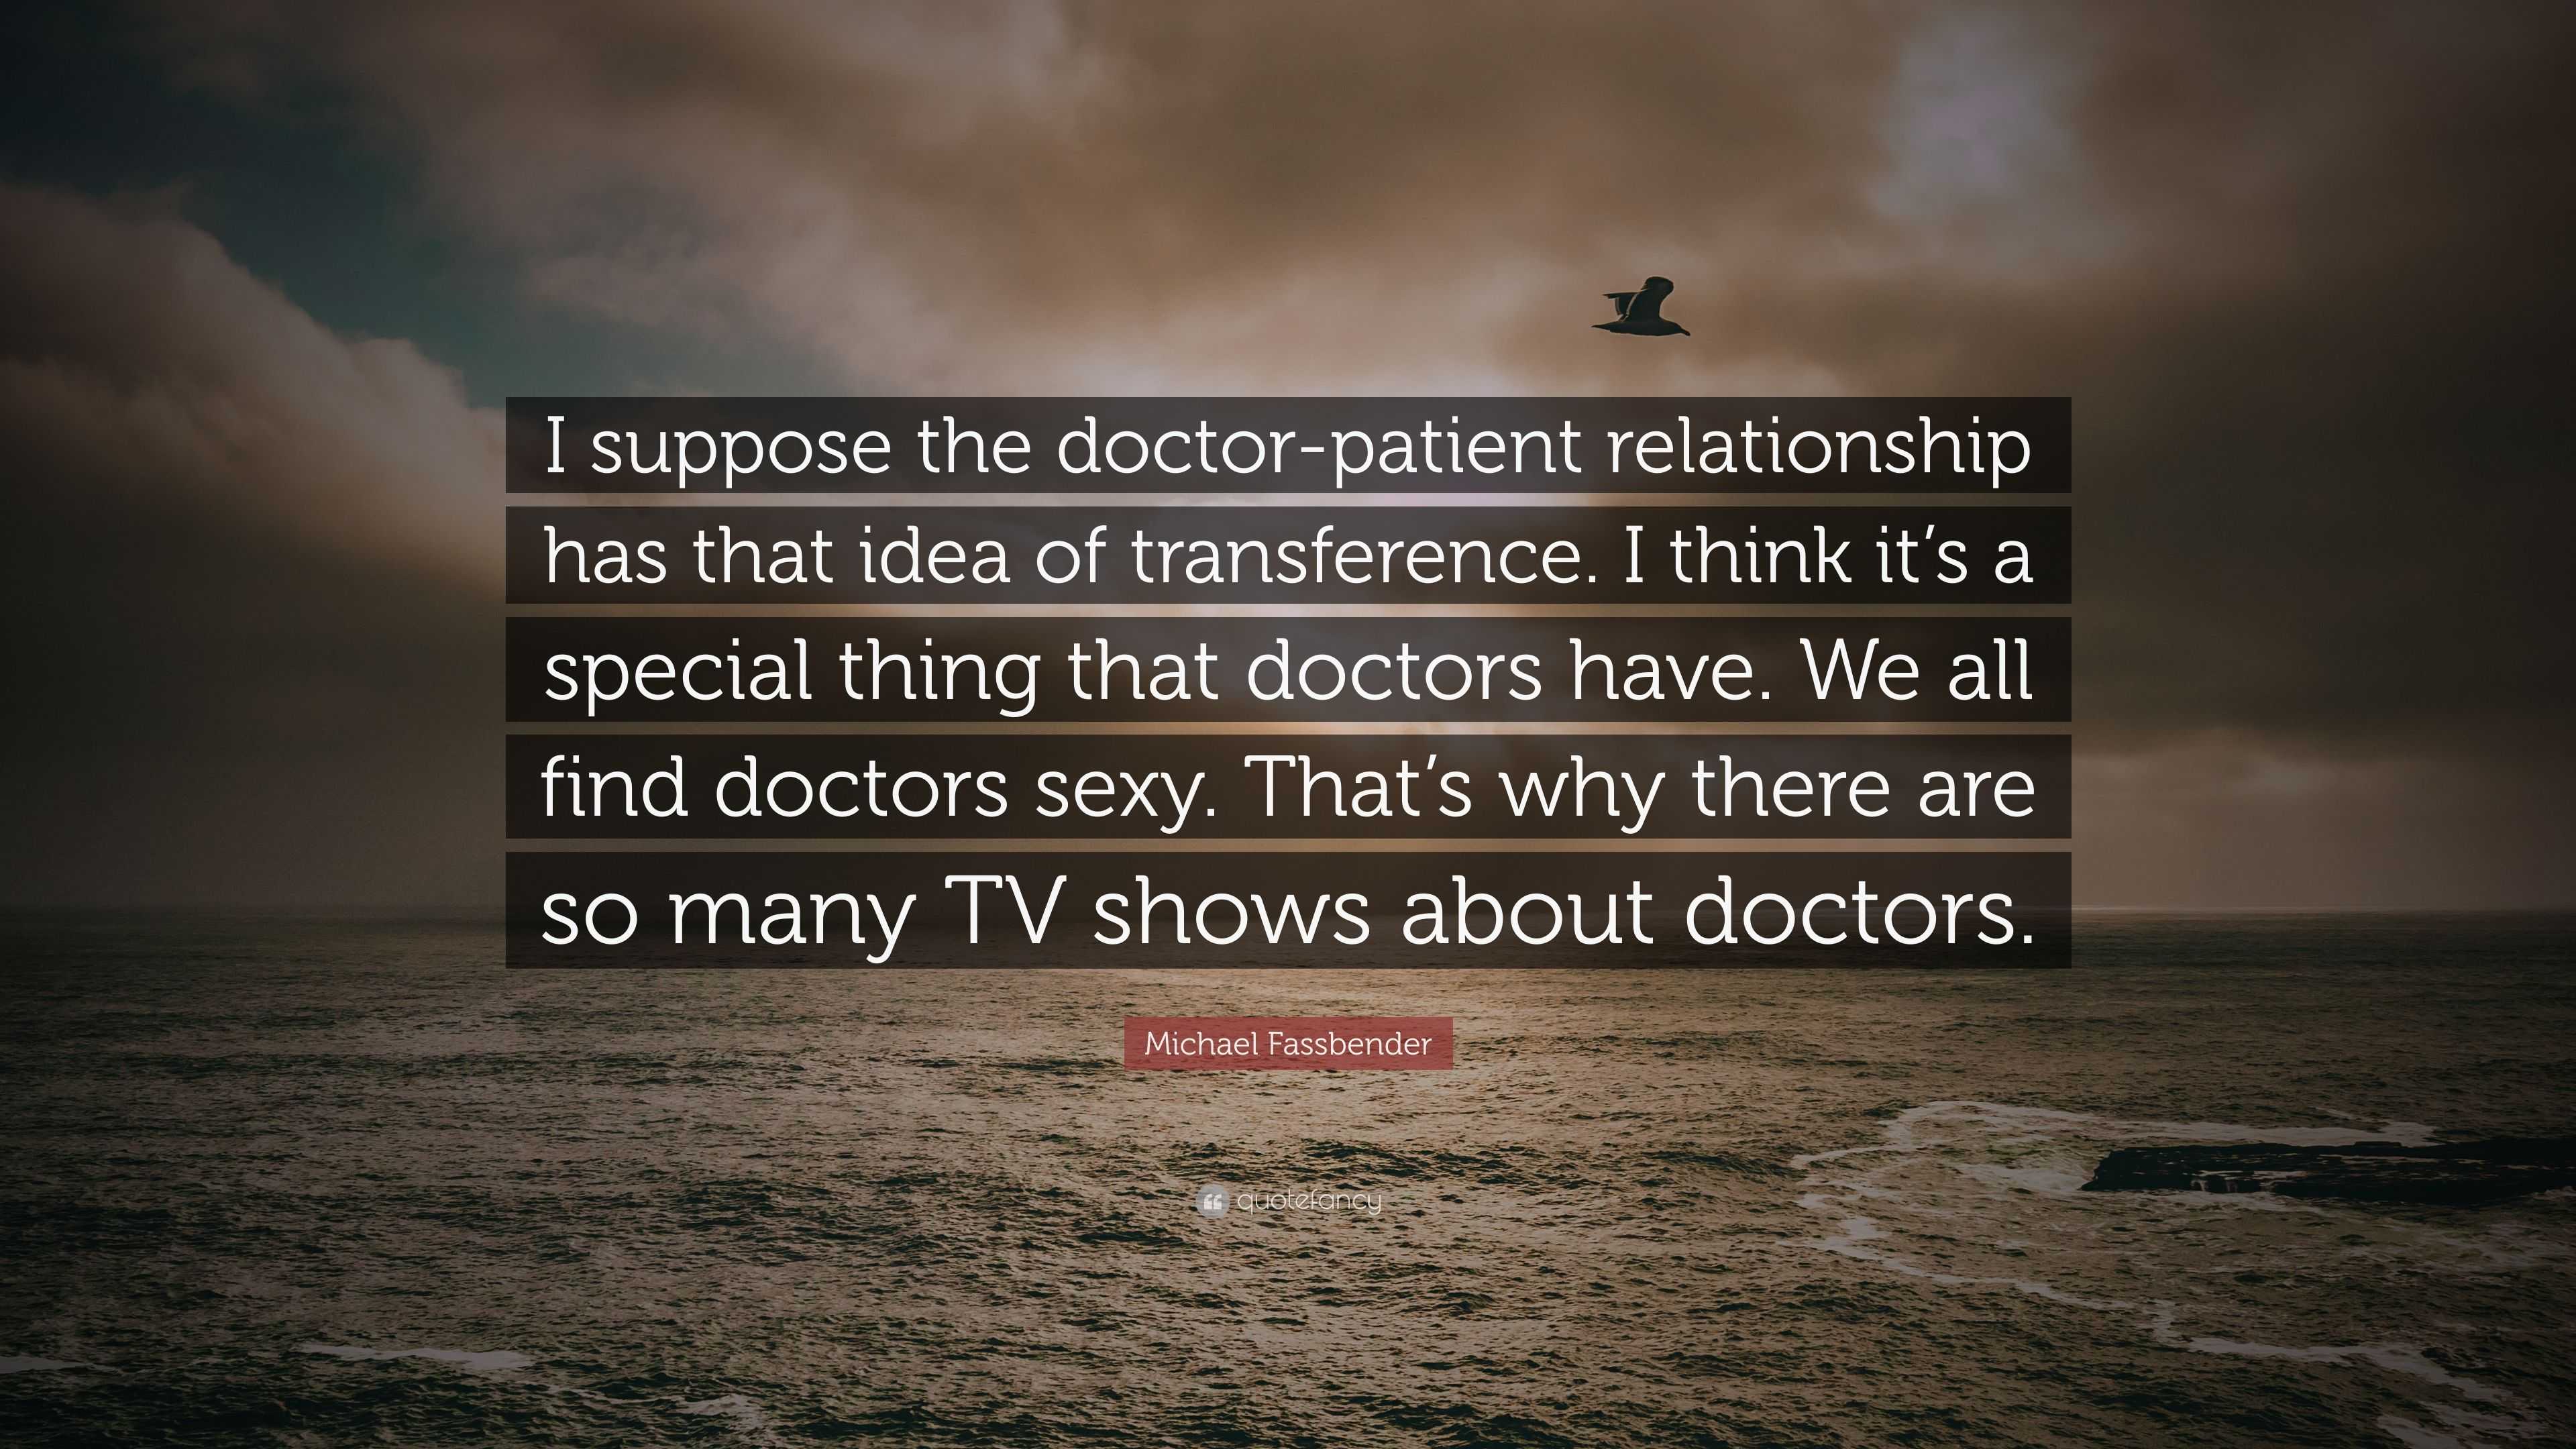 Michael Fassbender Quote: “I suppose the doctor-patient relationship has  that idea of transference. I think it's a special thing that doctors  have....”